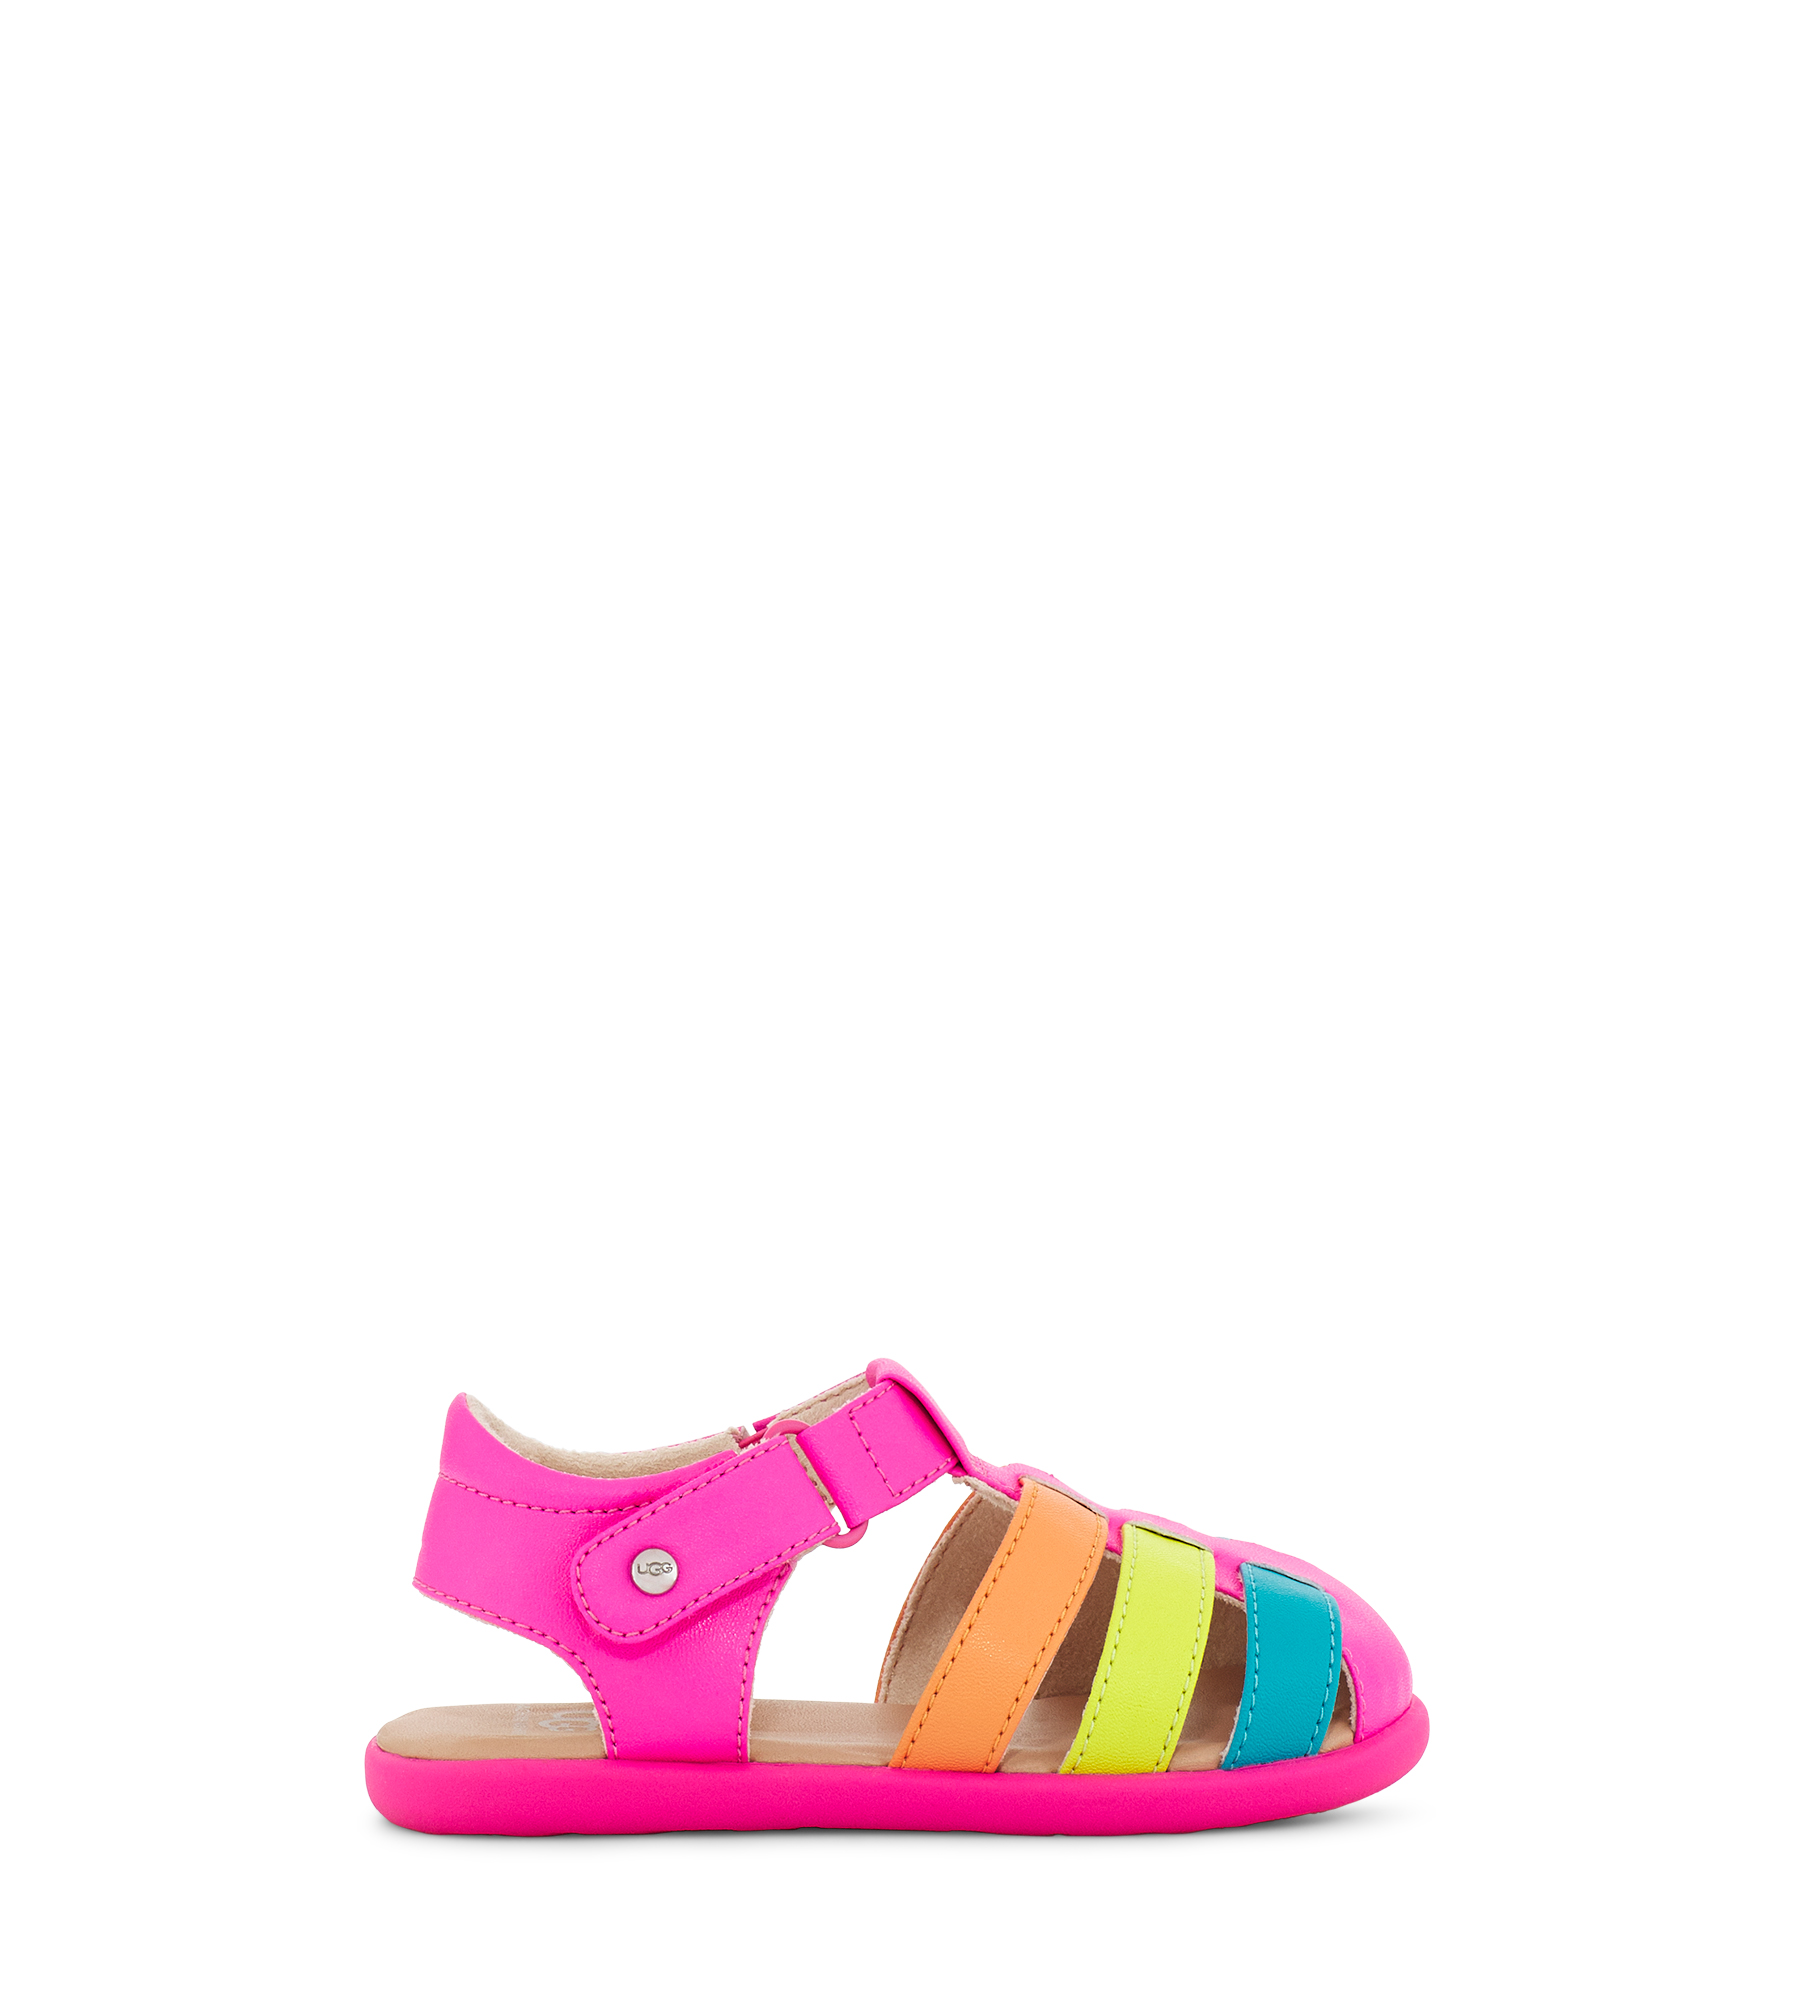 UGG Kolding Sandales pour Bébé in Pink Rainbow, Taille 28.5, Synthu00E9Tique